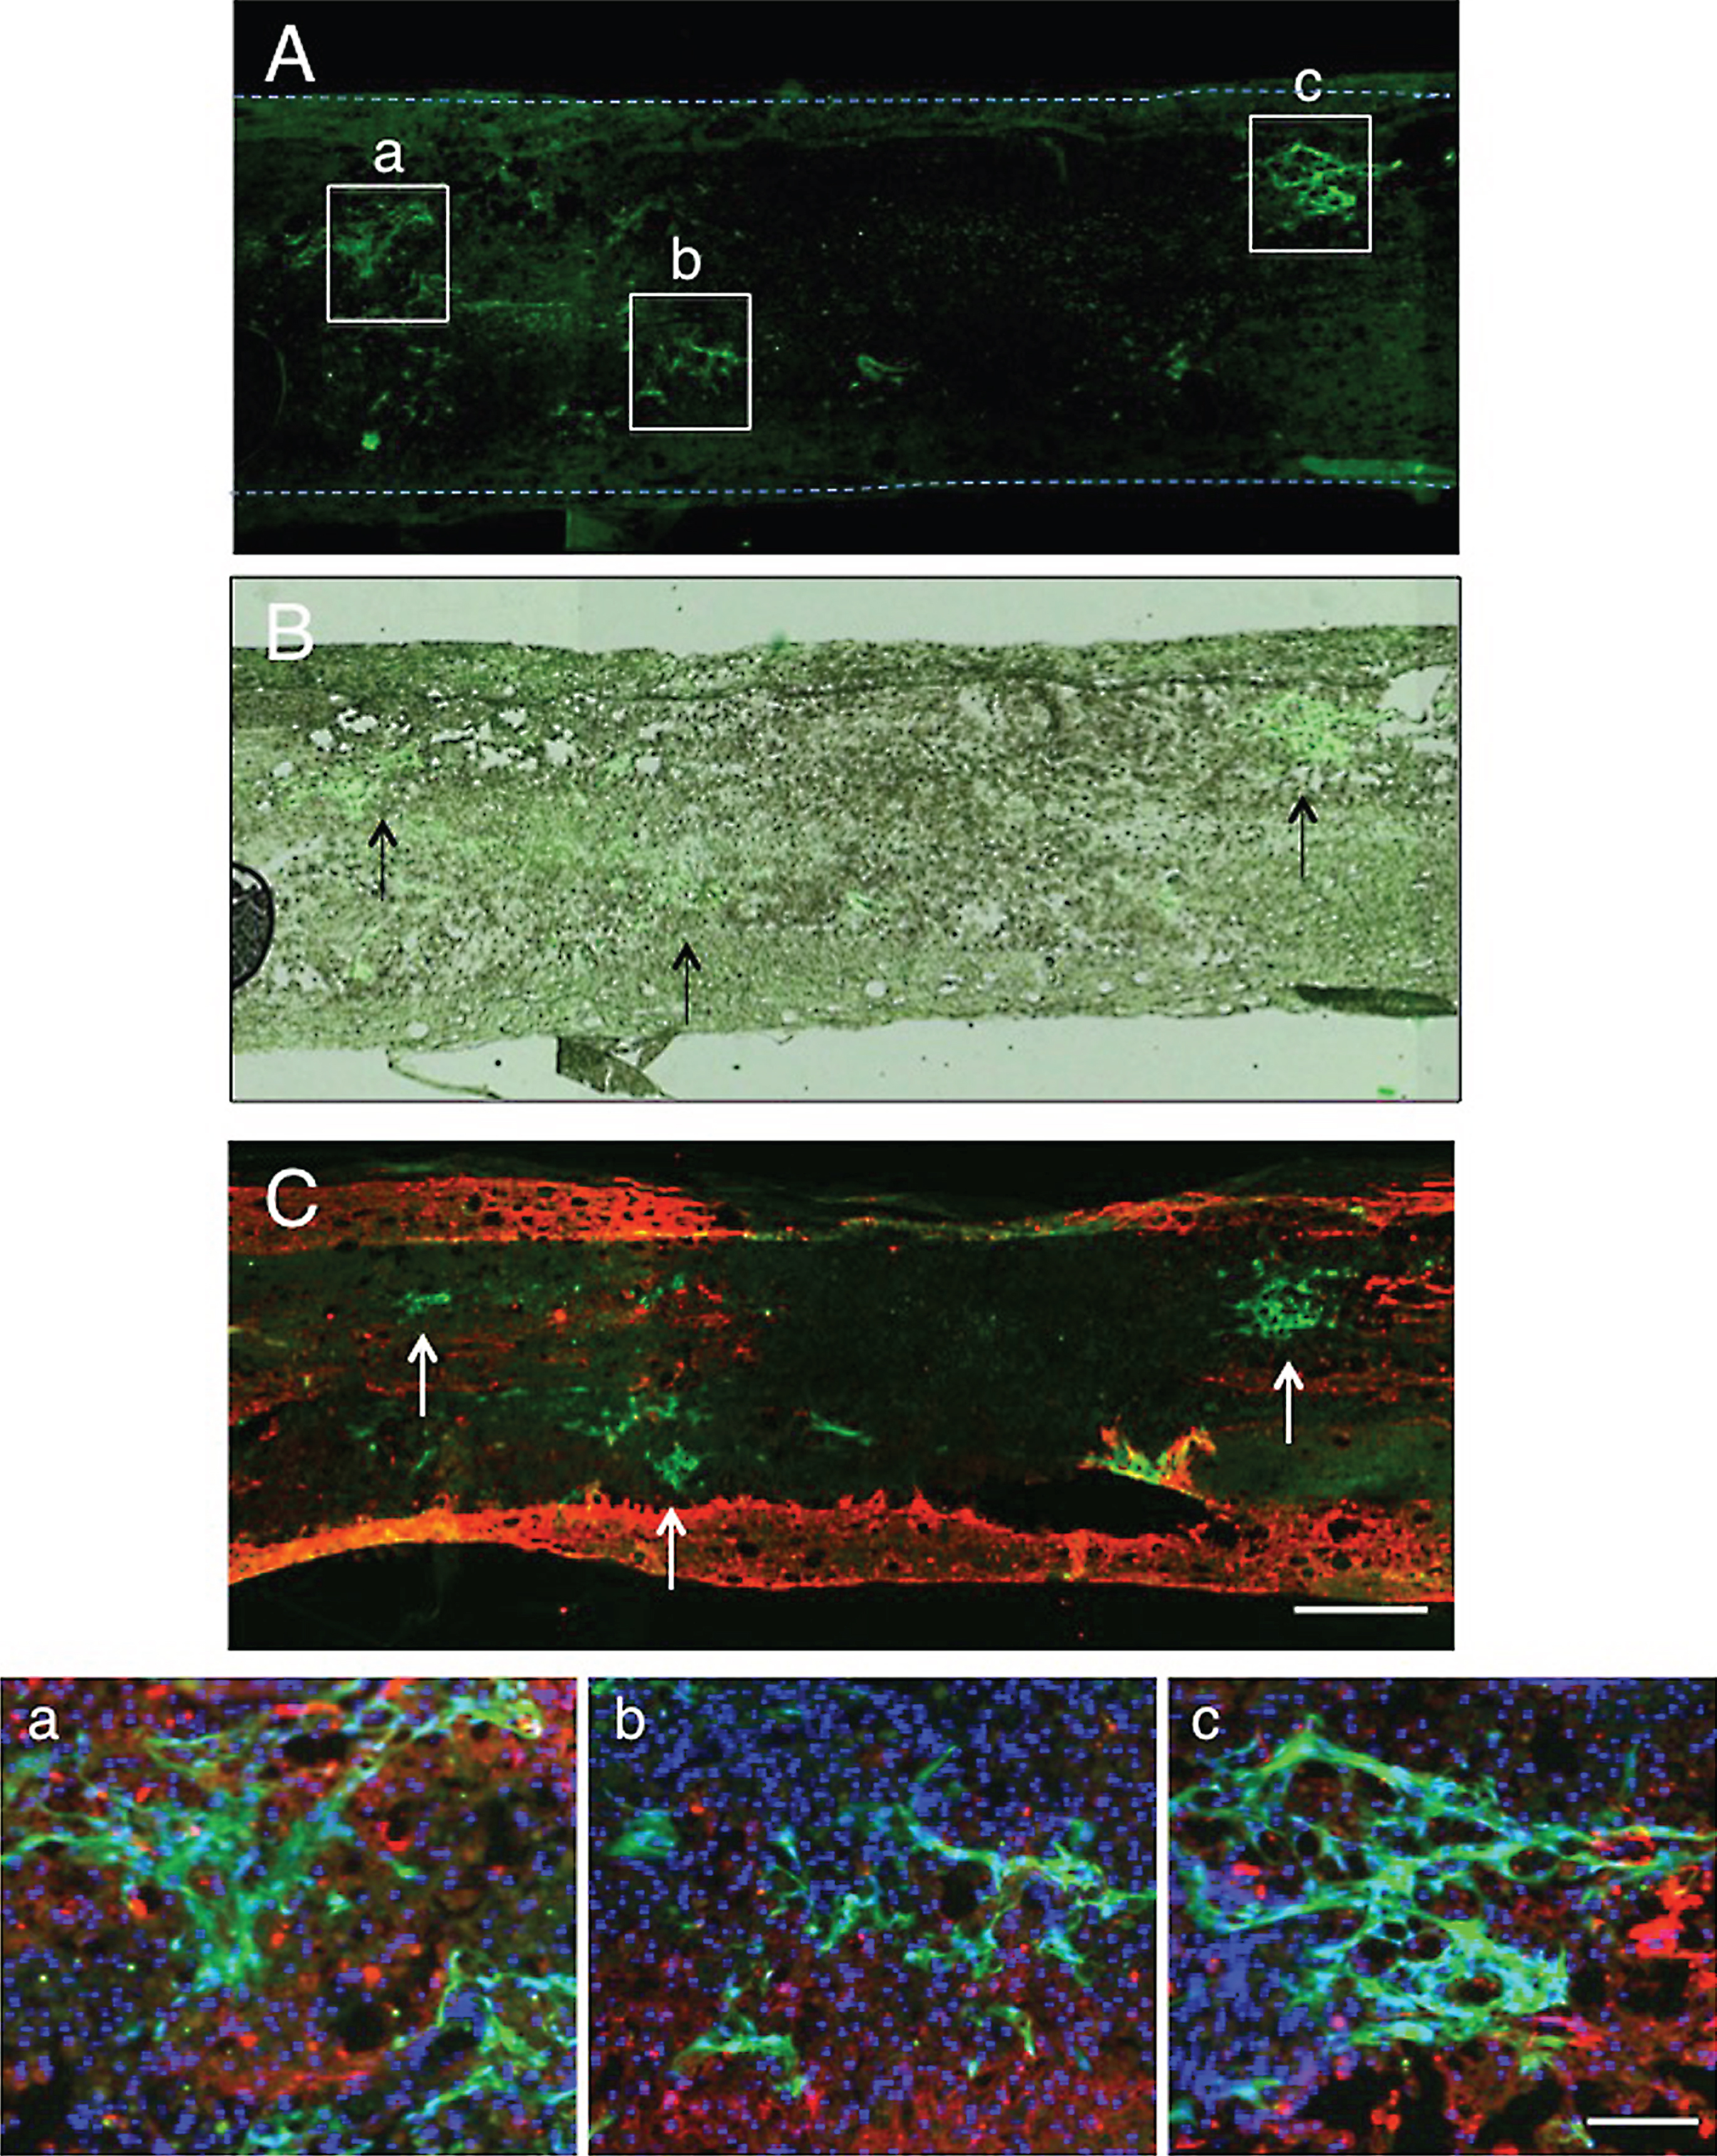 Localization of CPECs in the spinal cord lesion 2 days after transplantation. A: This fluorescent micrograph shows the presence of clusters of CPECs in the spinal cord lesion. Three large CPEC clusters are shown with rectangles (a-c). The dotted lines indicate the contour of the spinal cord. B: An unstained transmitted-light micrograph was merged in the fluorescent micrograph of panel A to show the localization of transplanted CPECs in the spinal cord tissue. Arrows point to clusters of CPECs corresponding to those shown in rectangles in panel A. C: GFAP immunostaining for astrocytes (red). This section was at the level a few sections away from that of panel A. Green-fluorescent CPEC clusters (some of them are pointed out with arrows) are located partly in association with astrocytes at the border of the lesion. No astrocytes can be seen within the lesion. a-c: The clusters of CPECs enclosed with rectangles (a-c) in panel A were enlarged to show the association with astrocytes. CPECs are partly associated with astrocytes at the border of the lesion (red). Cell nuclei were stained blue by DAPI staining. Scale: 500 μm for A- C, and 100 μm for a-c.